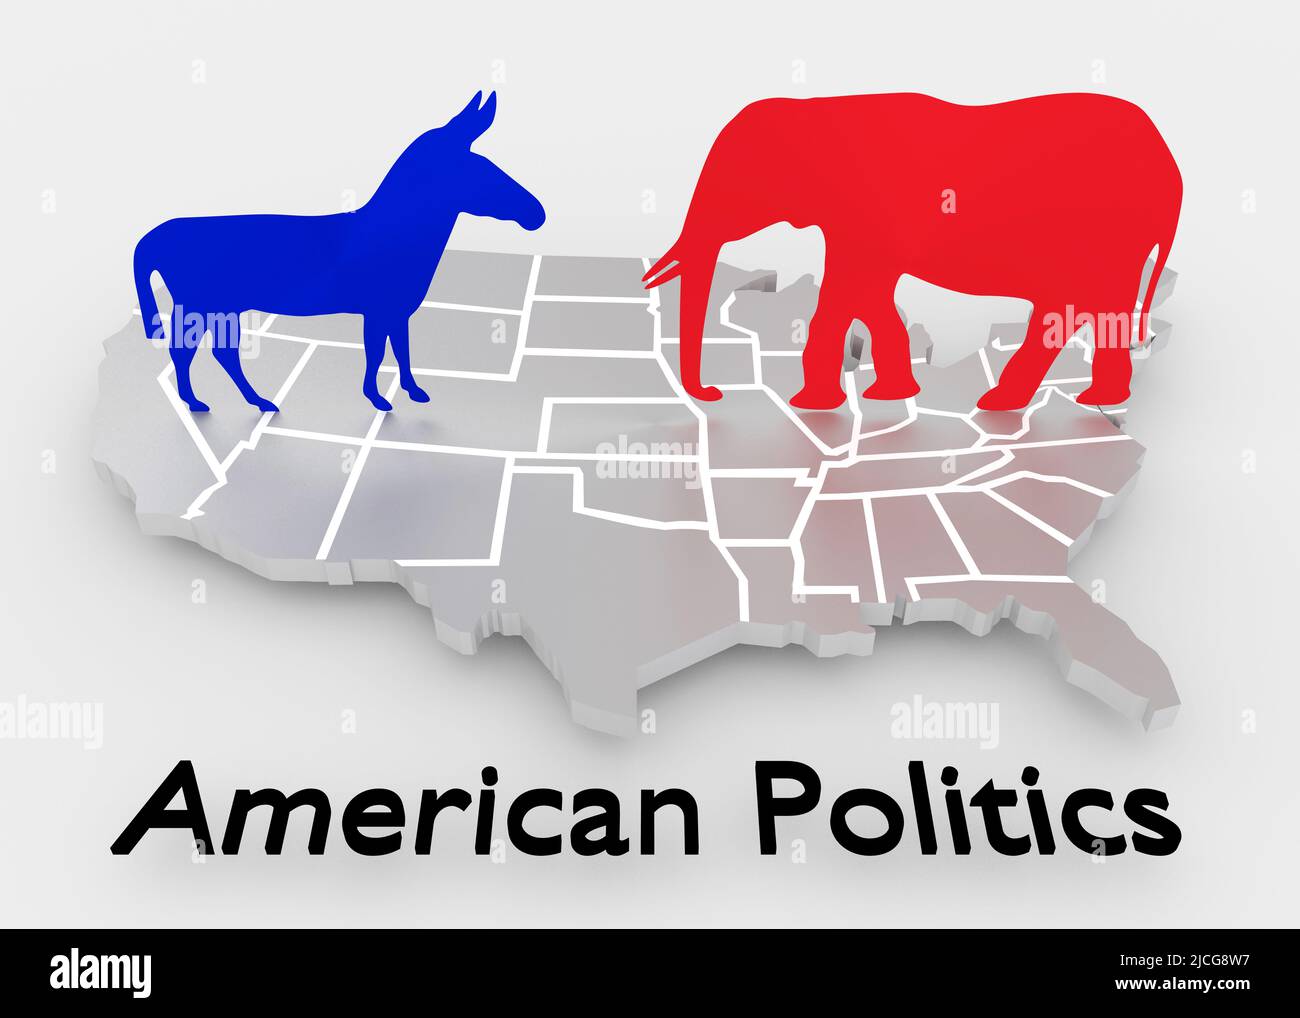 3D illustration of an embossment of the United States of America along with symbolic donkey and elephant, titled as American Politics. Stock Photo